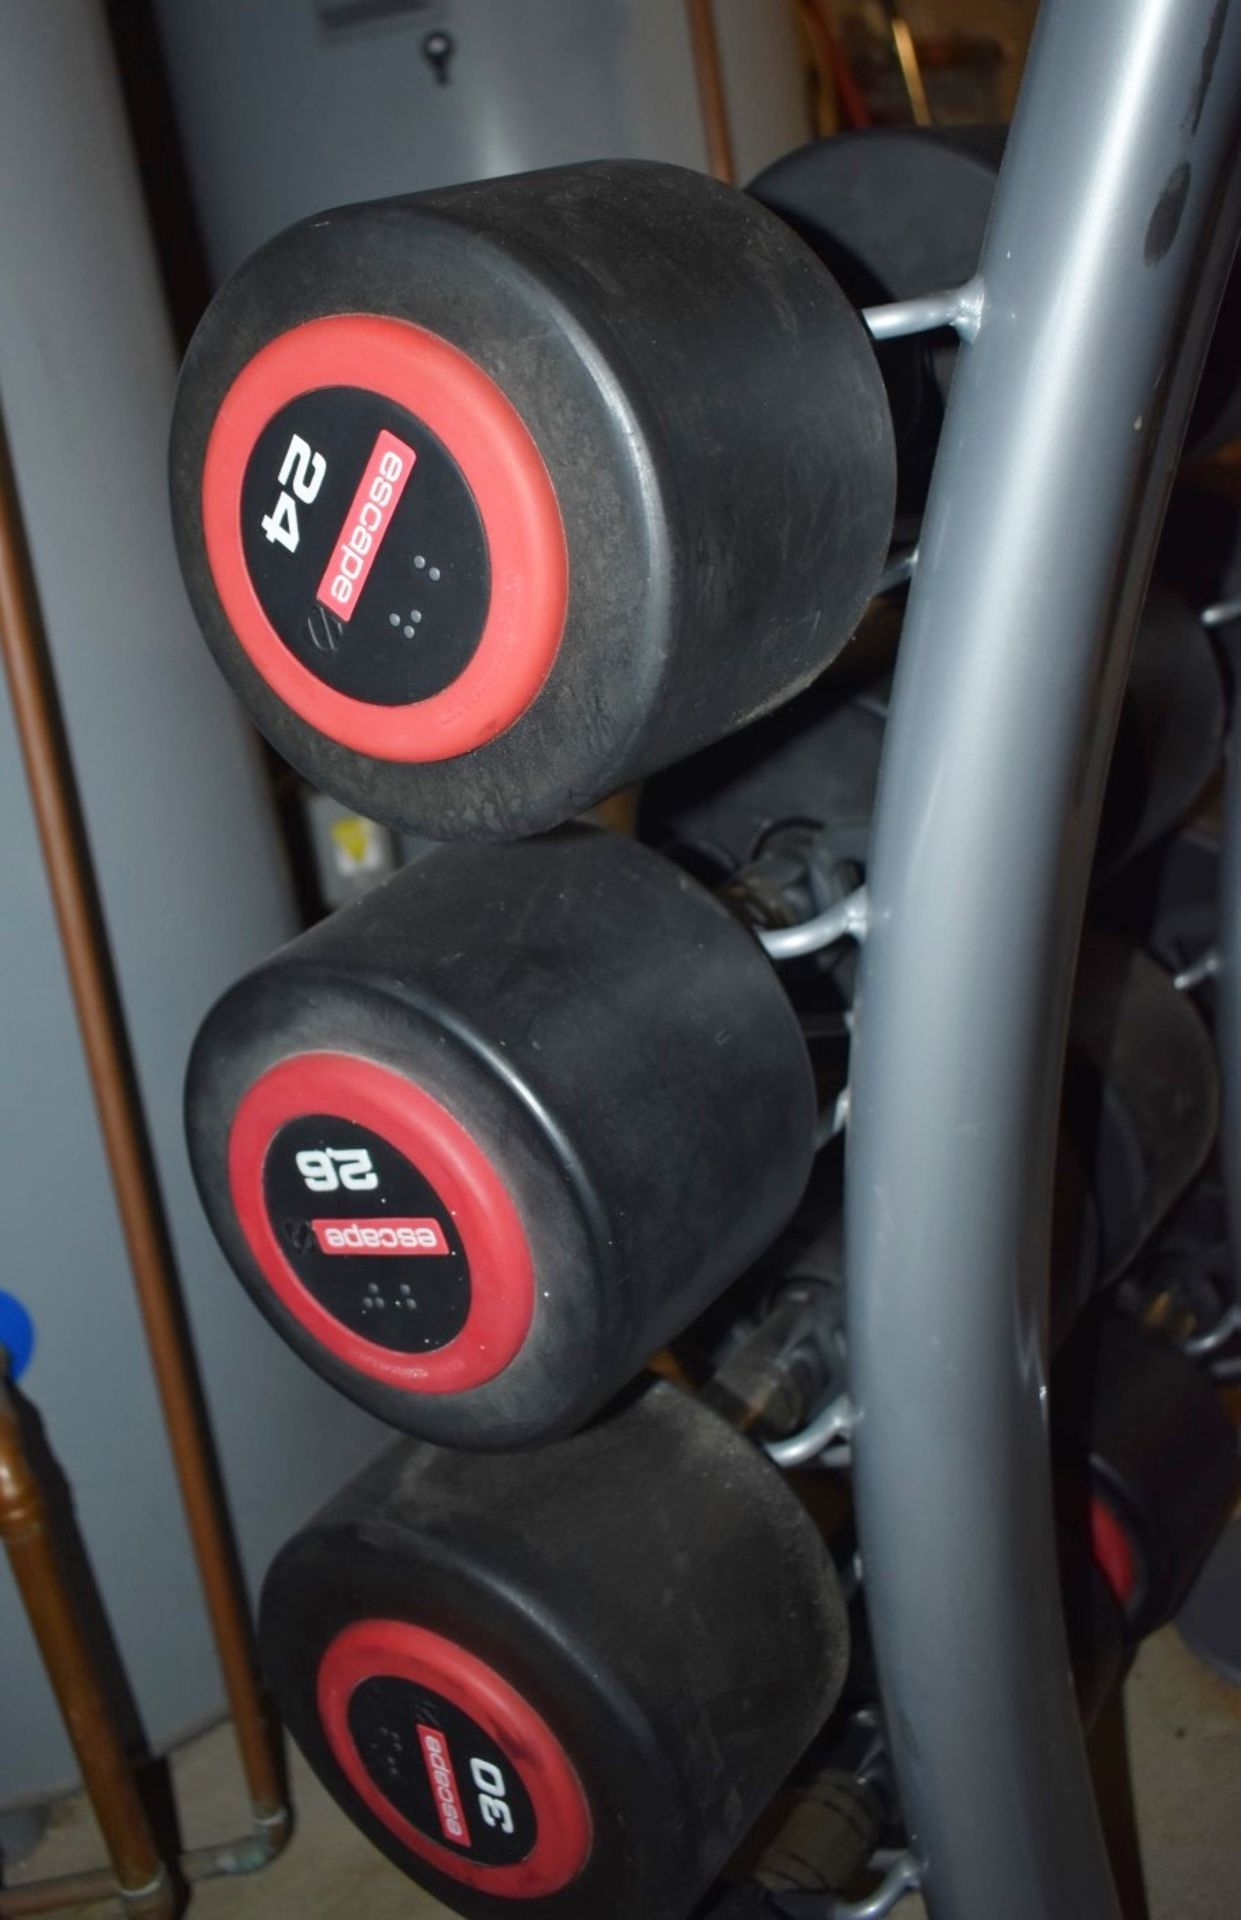 18 x Escape Polyurethane Dumbell Weights - Includes 8kg to 30kg Dumbells and Rubber Dumrbell - Image 7 of 7